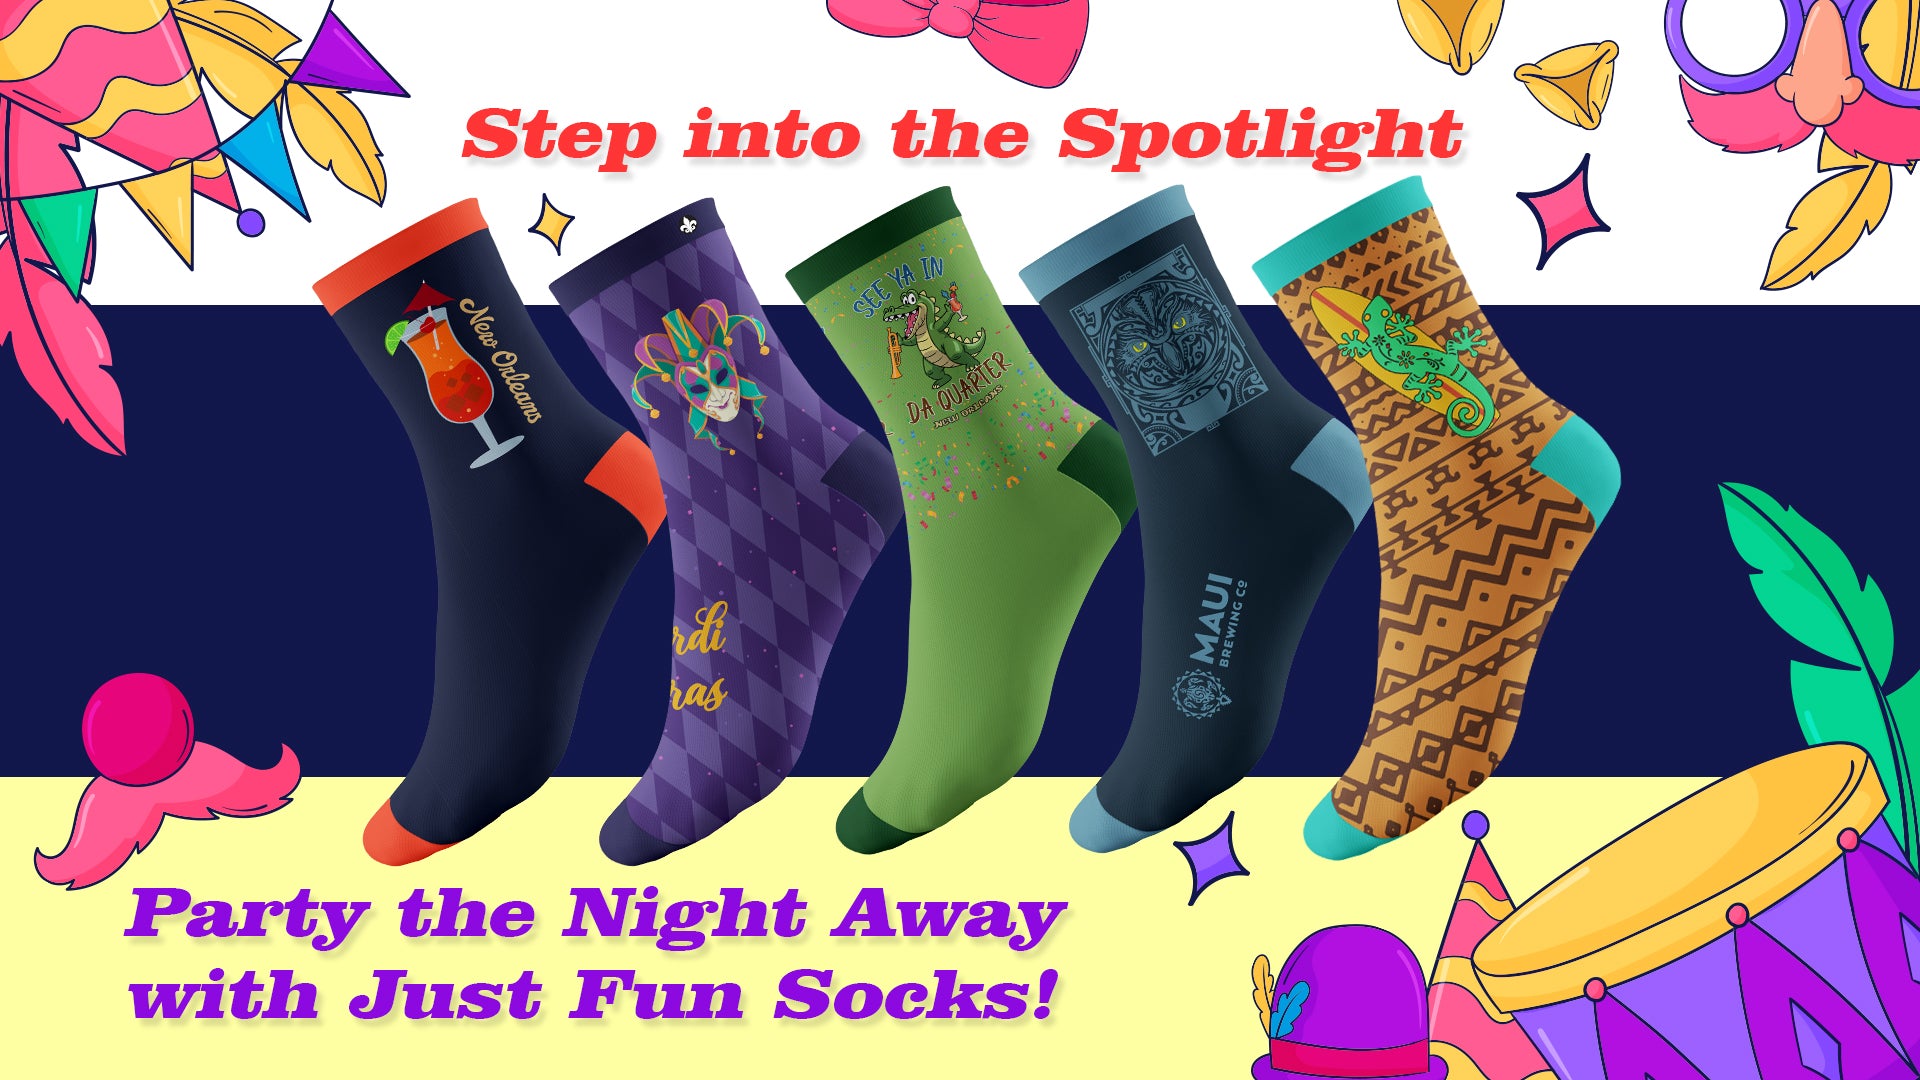 Step into the Spotlight: Party the Night Away with Just Fun Socks ...